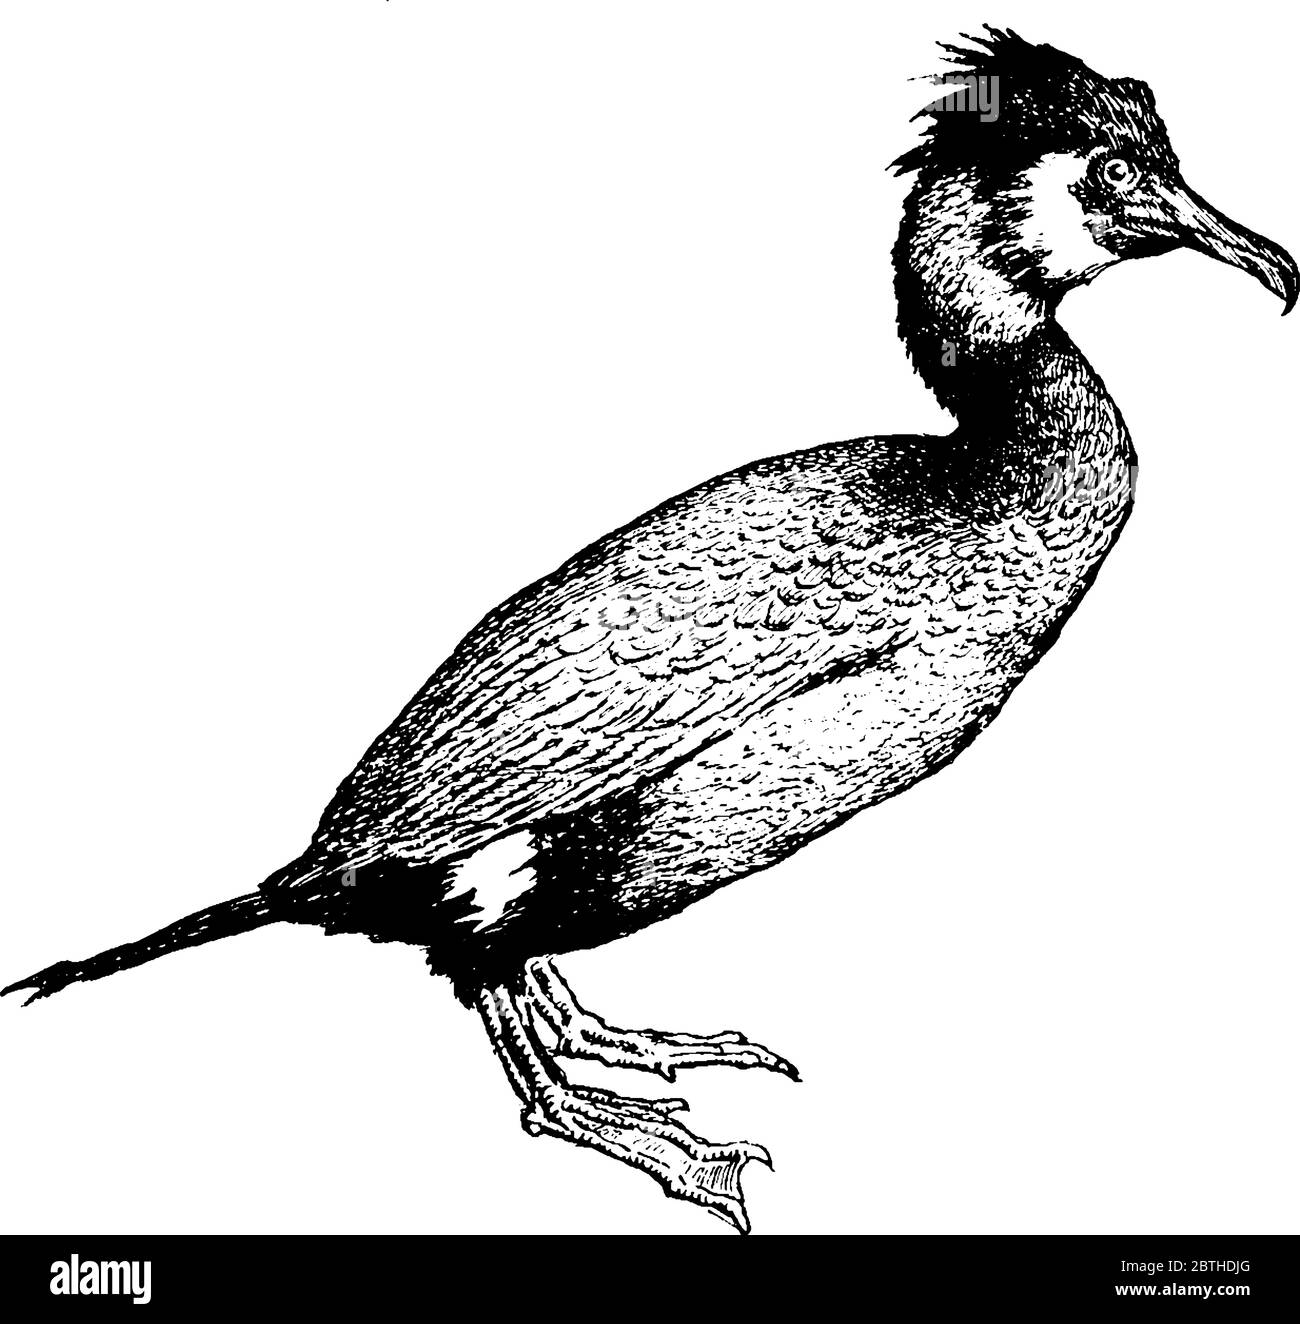 The Cormorant is a large, black, fish-eating aquatic bird of family Phalacrocoracidae with a long, hook-tipped bill, vintage line drawing or engraving Stock Vector